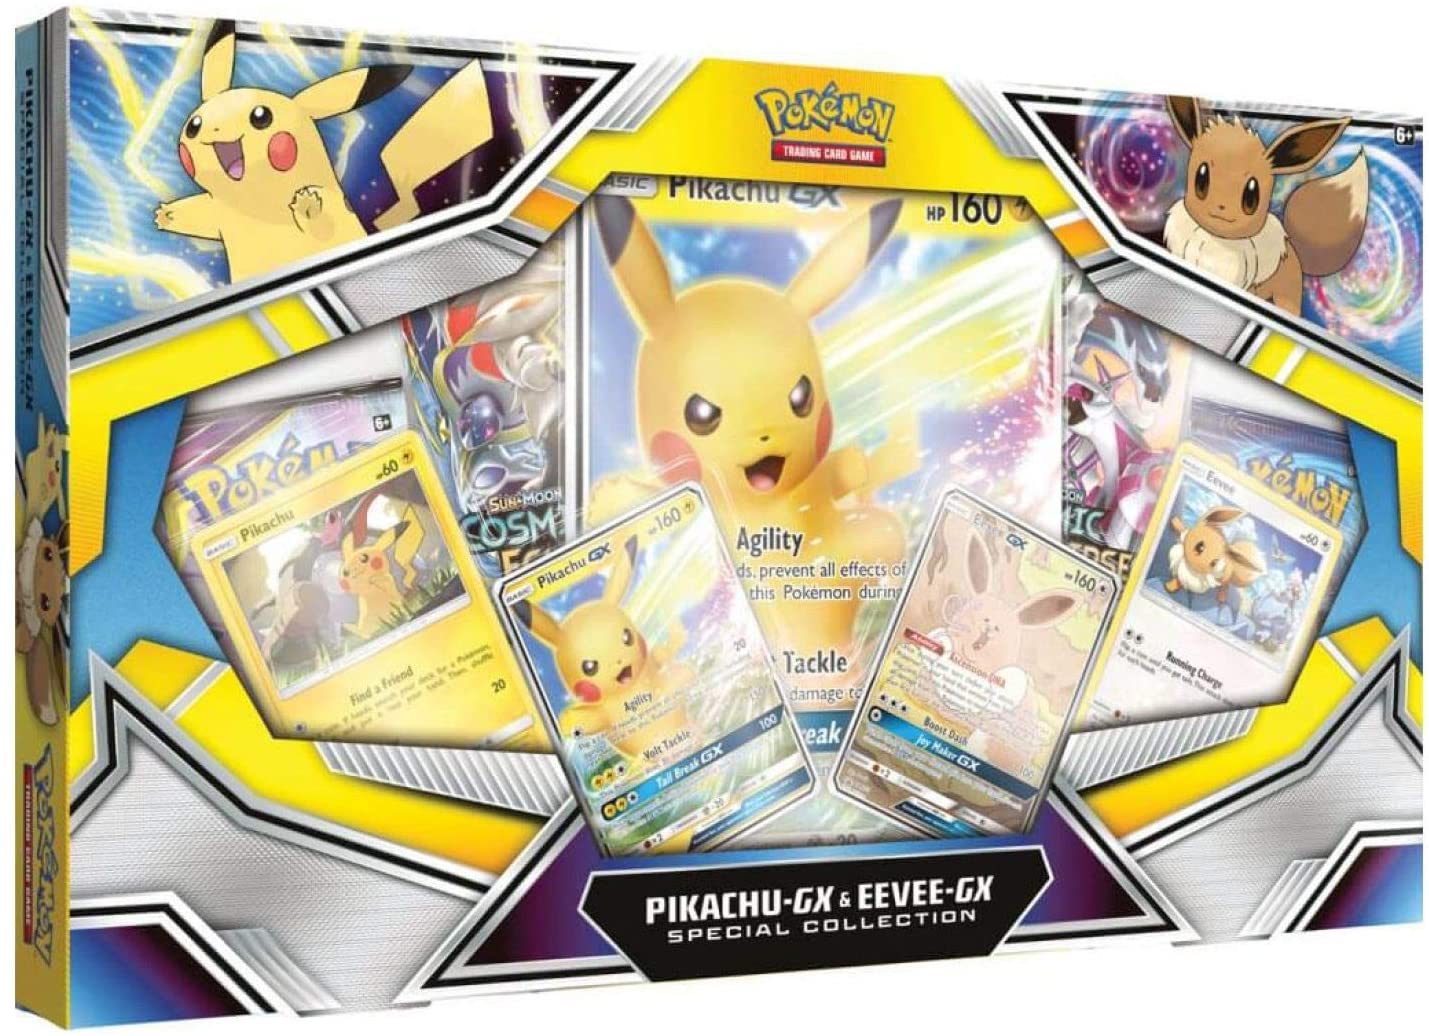 Pikachu GX & Eevee GX Special Collection Box